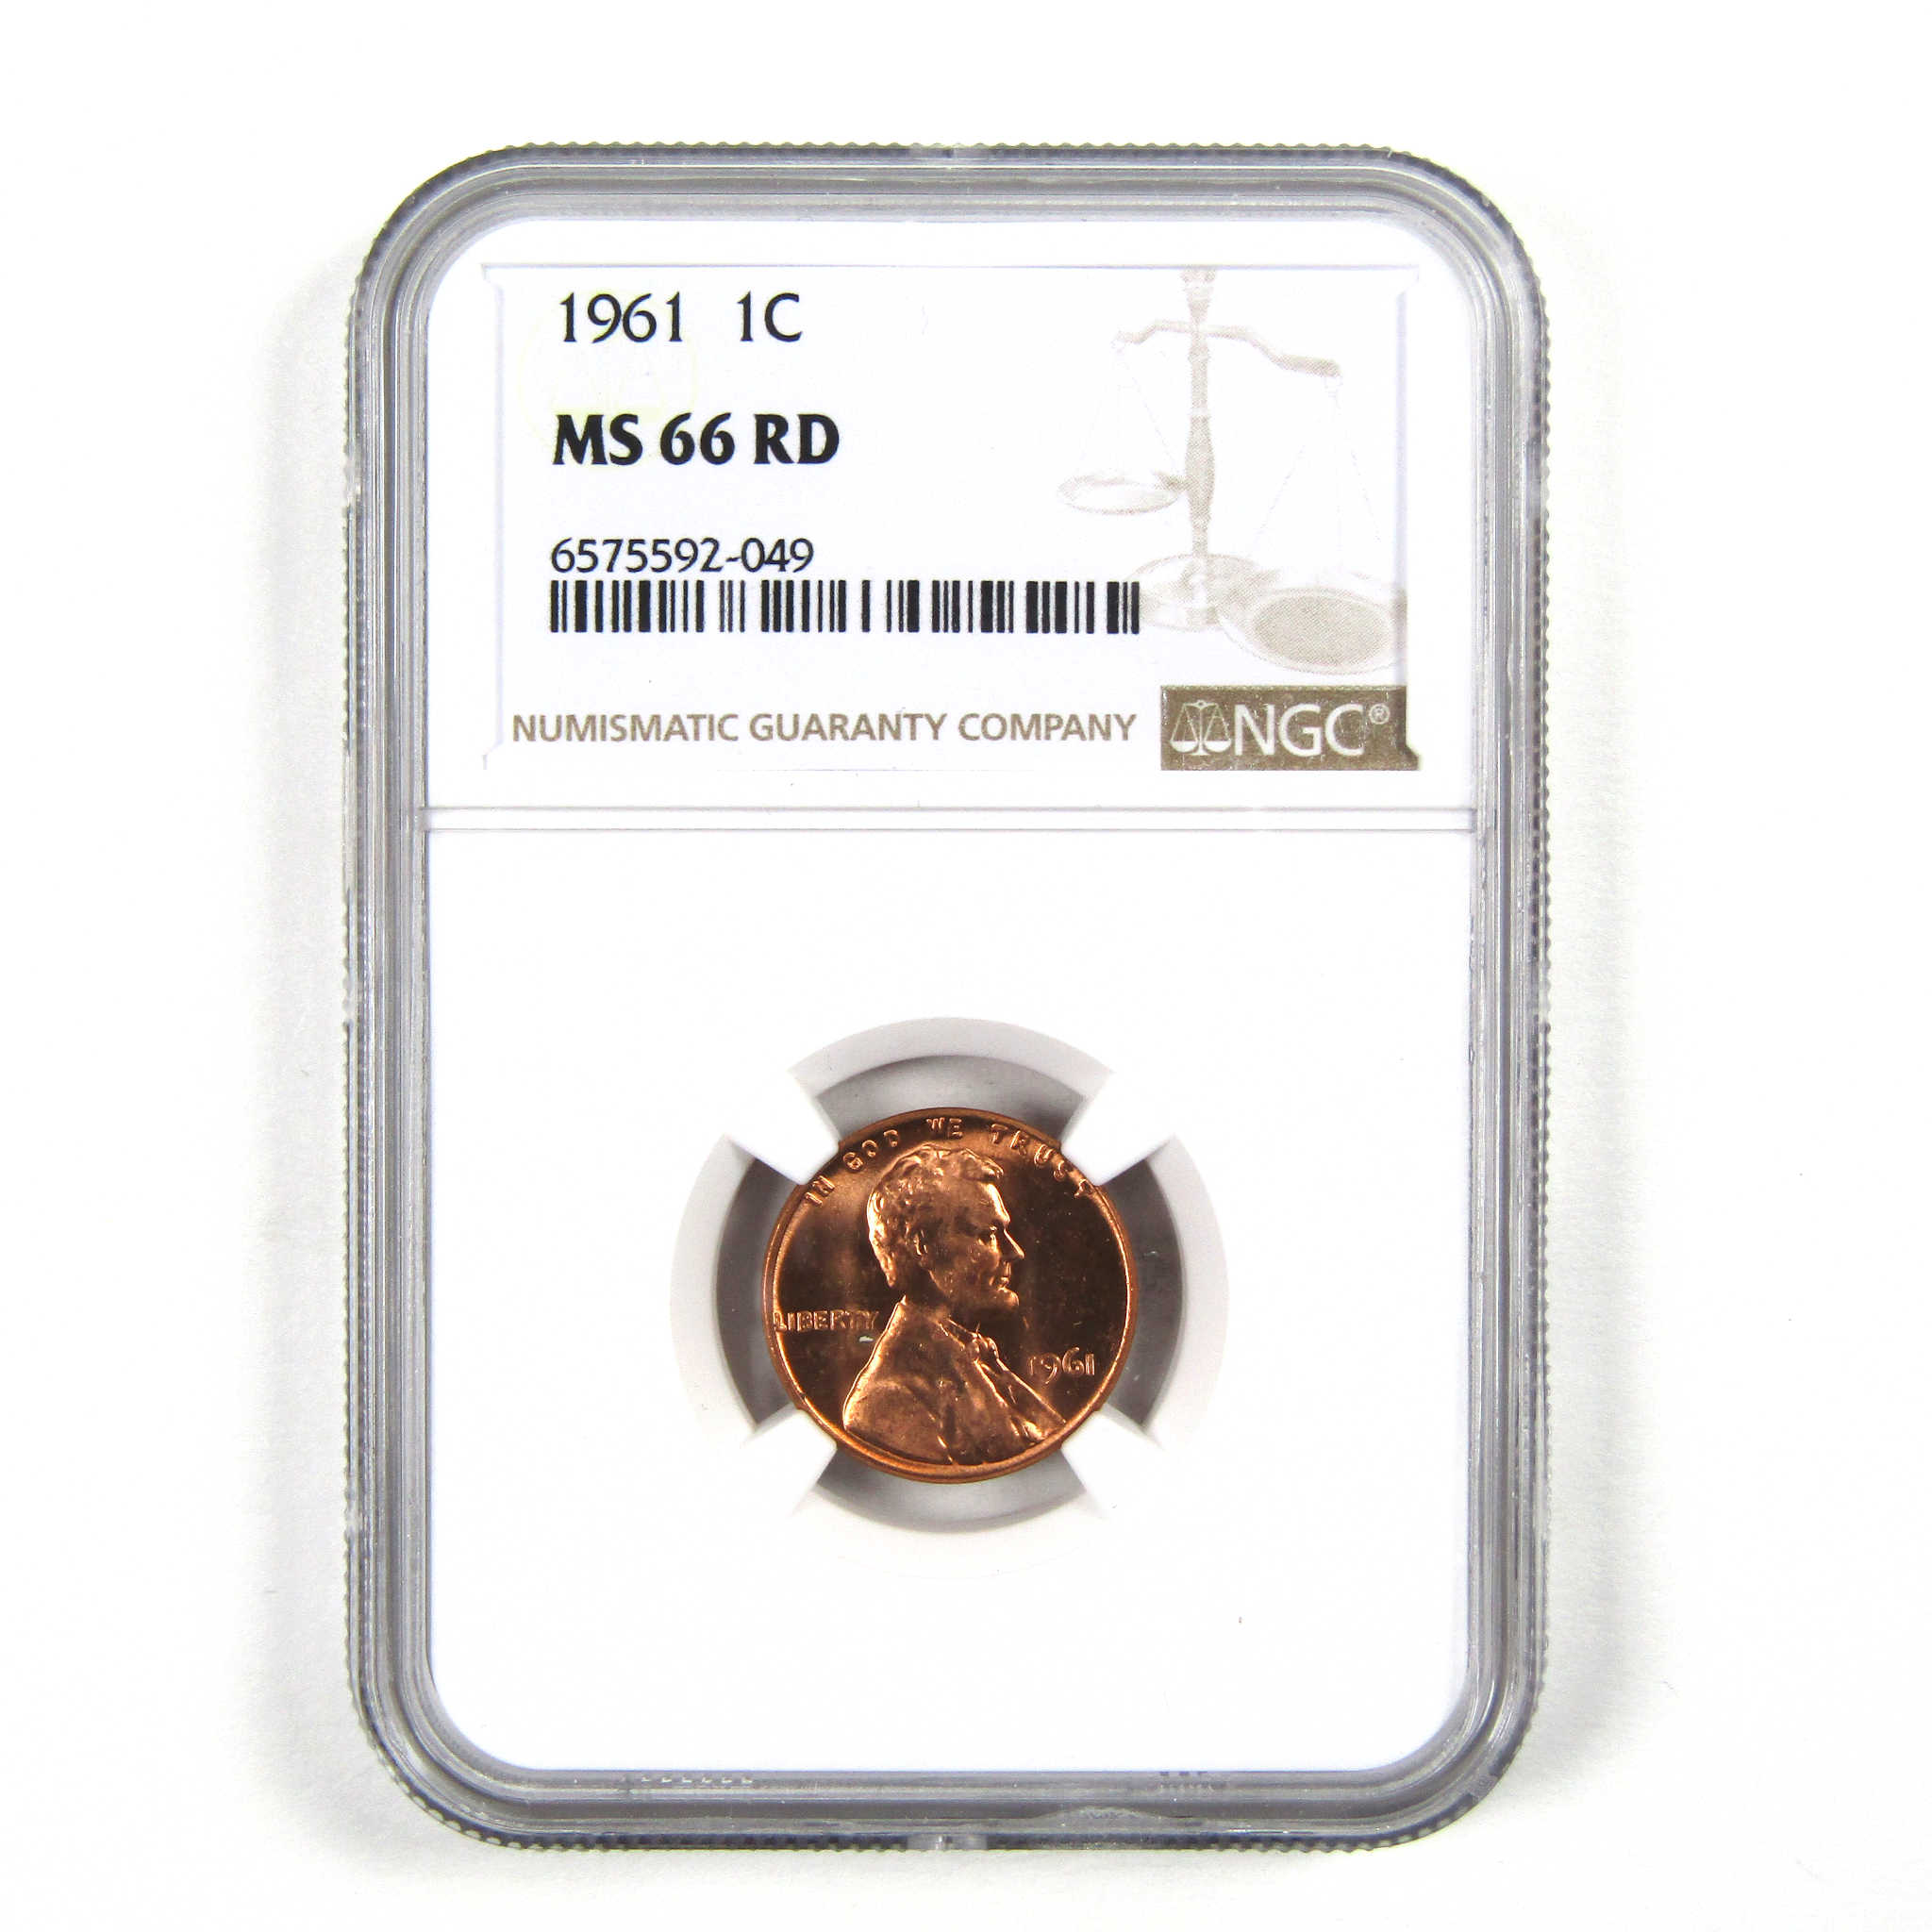 1961 Lincoln Memorial Cent MS 66 RD NGC Penny Uncirculated SKU:I3686